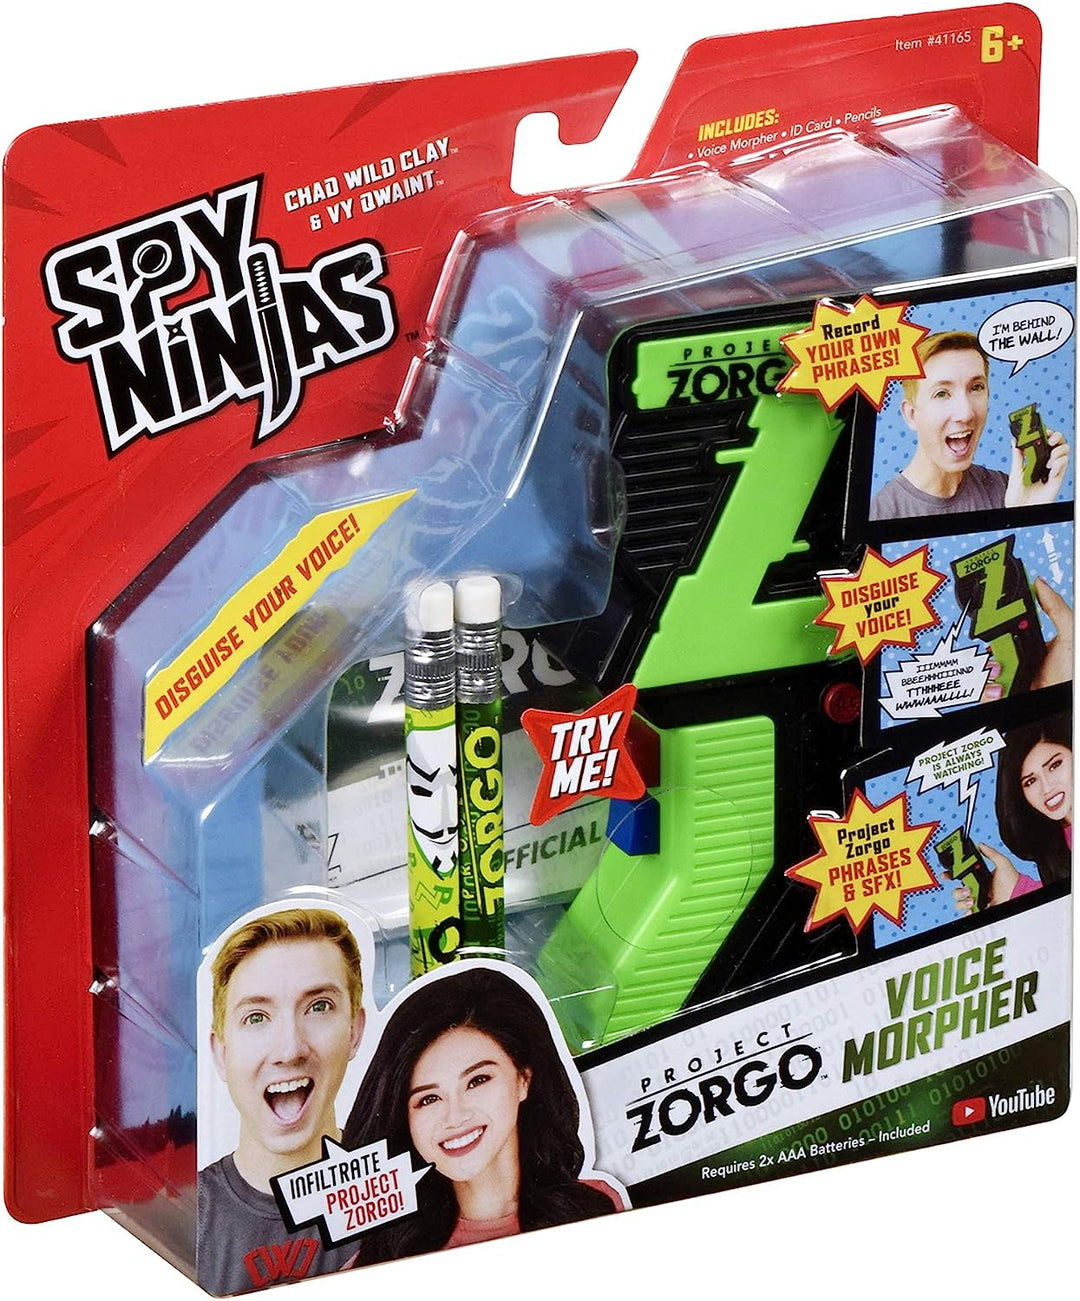 Spy Ninjas Voice Morpher. Help Infiltrate Project Zorgo! Disguise your voice with added sound effects